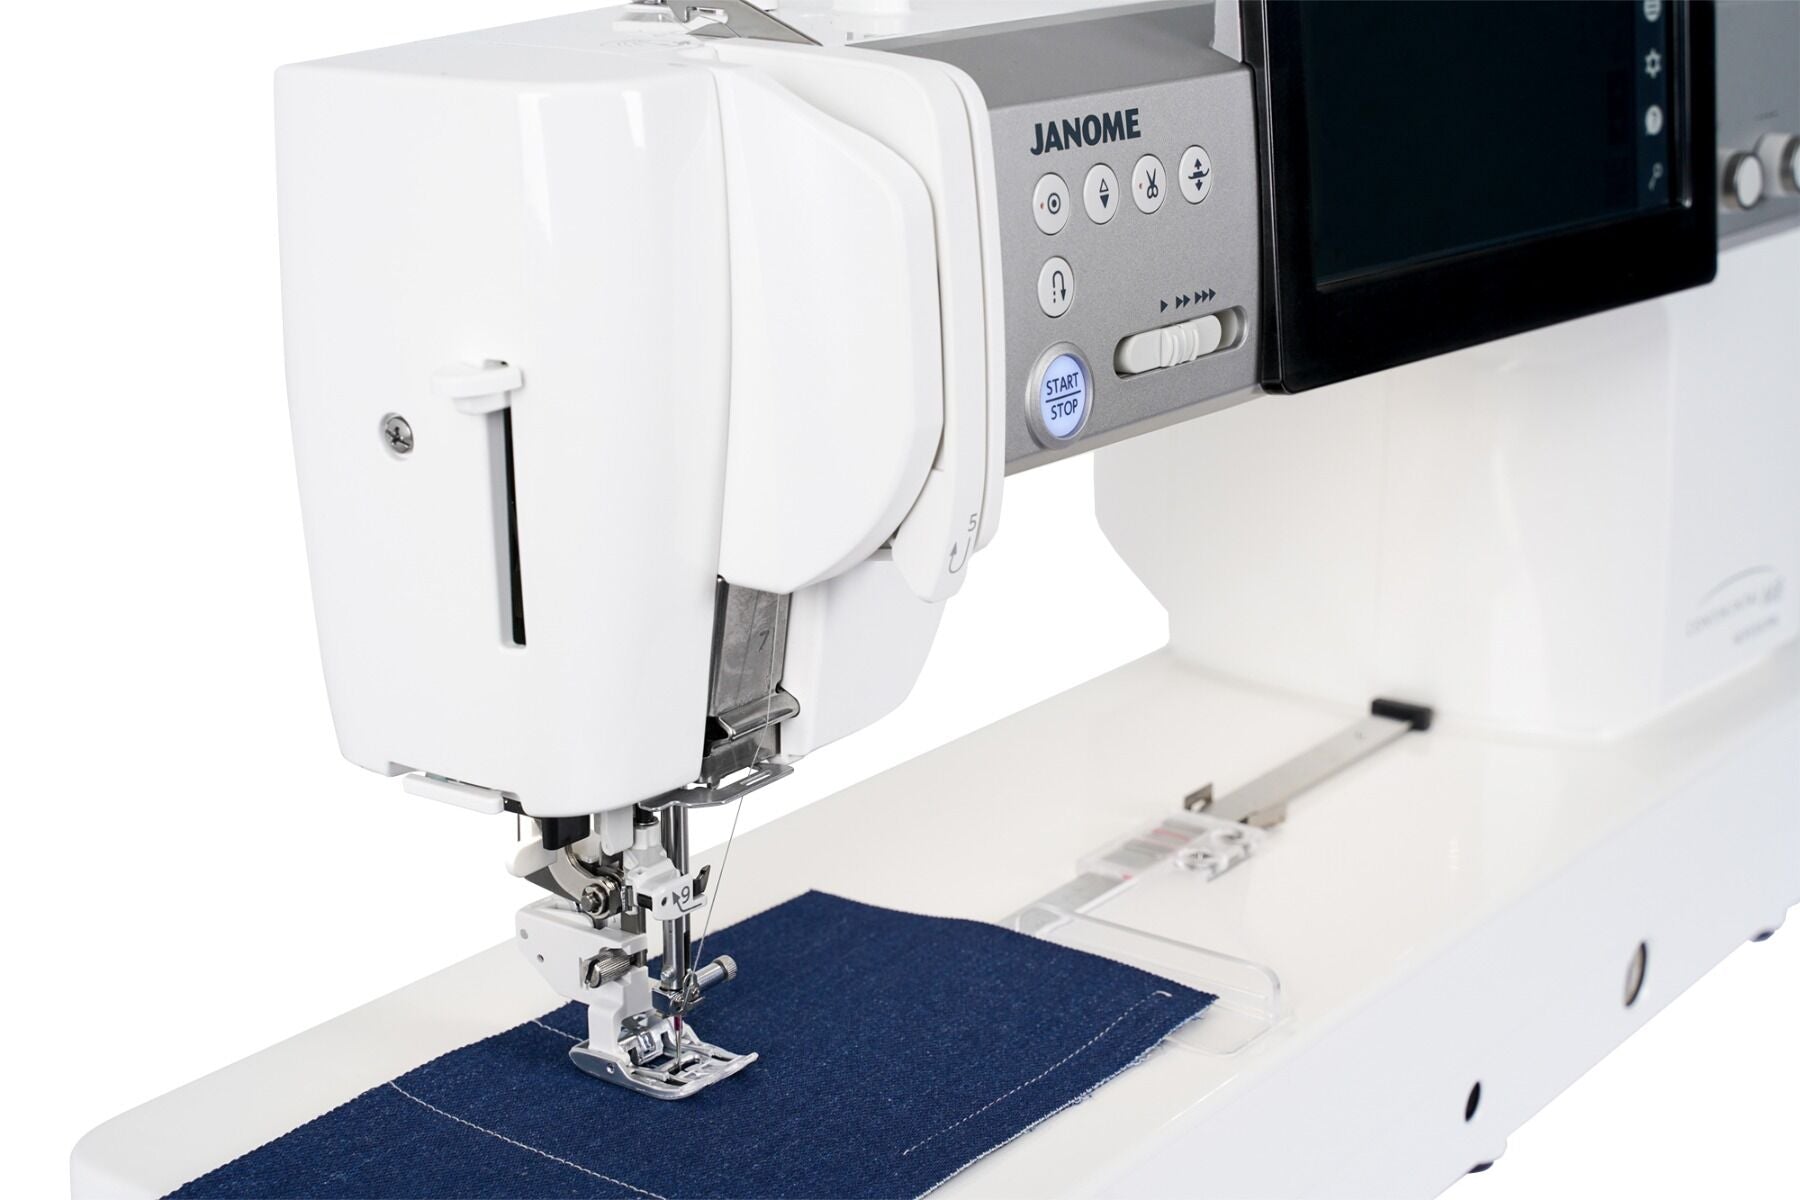 `,Janome Continental M8 Professional Quilting & Sewing Machine,Janome Continental M8 Professional Quilting & Sewing Machine, Janome Continental M8 Professional Quilting & Sewing Machine With A.S.R. (Accurate Stitch Regulator),,,,,Janome Continental M8 Professional Quilting & Sewing Machine